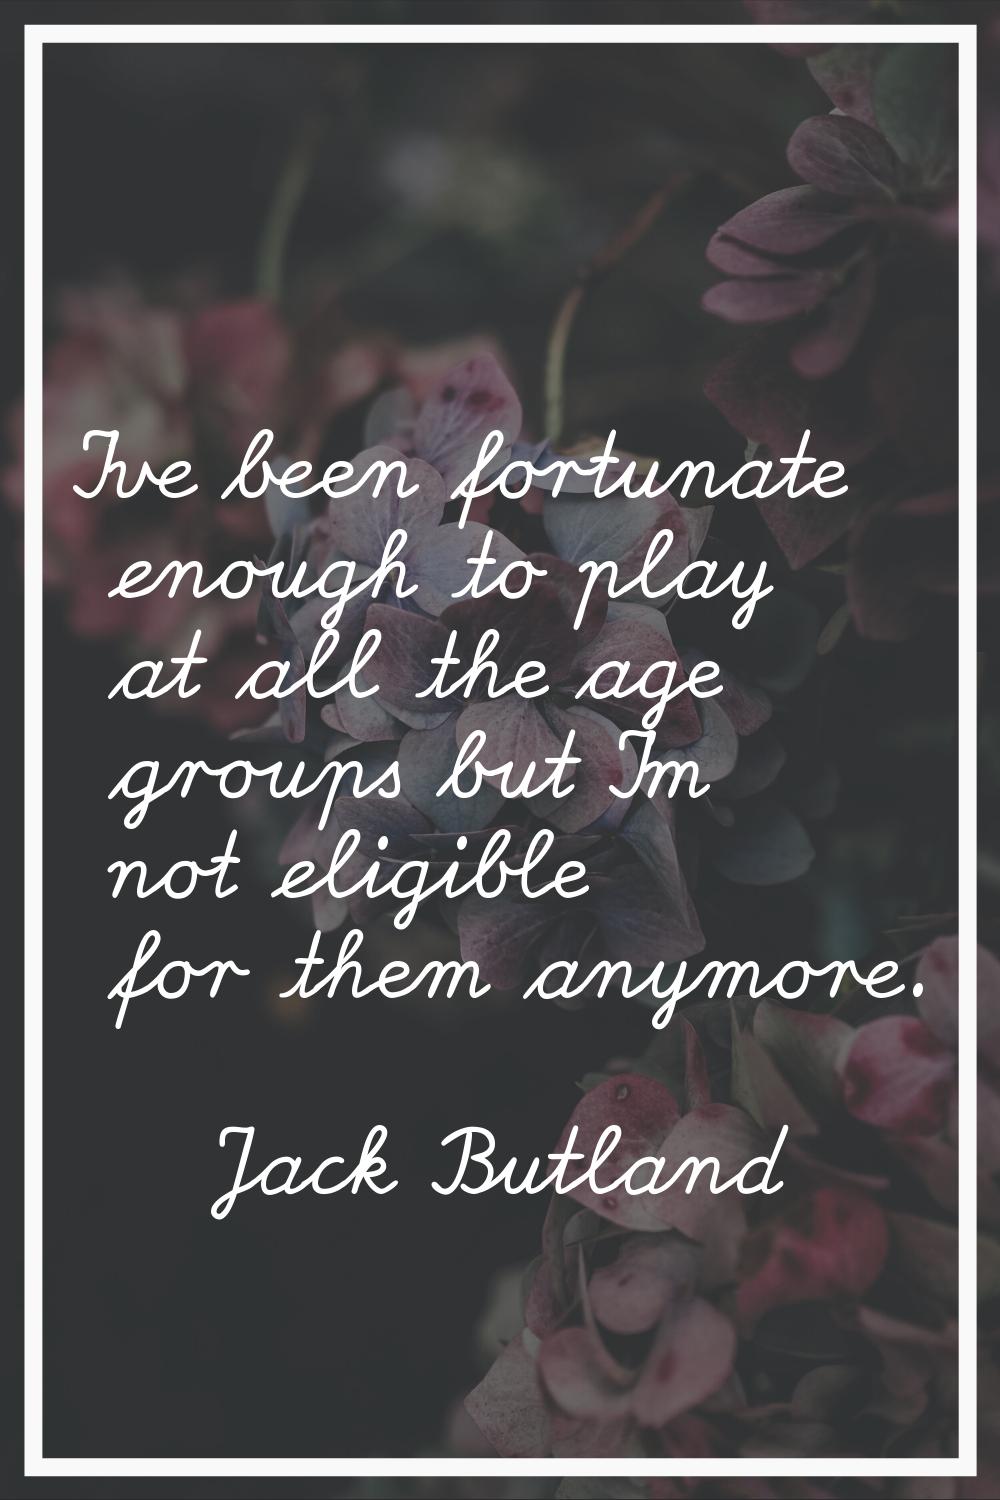 I've been fortunate enough to play at all the age groups but I'm not eligible for them anymore.